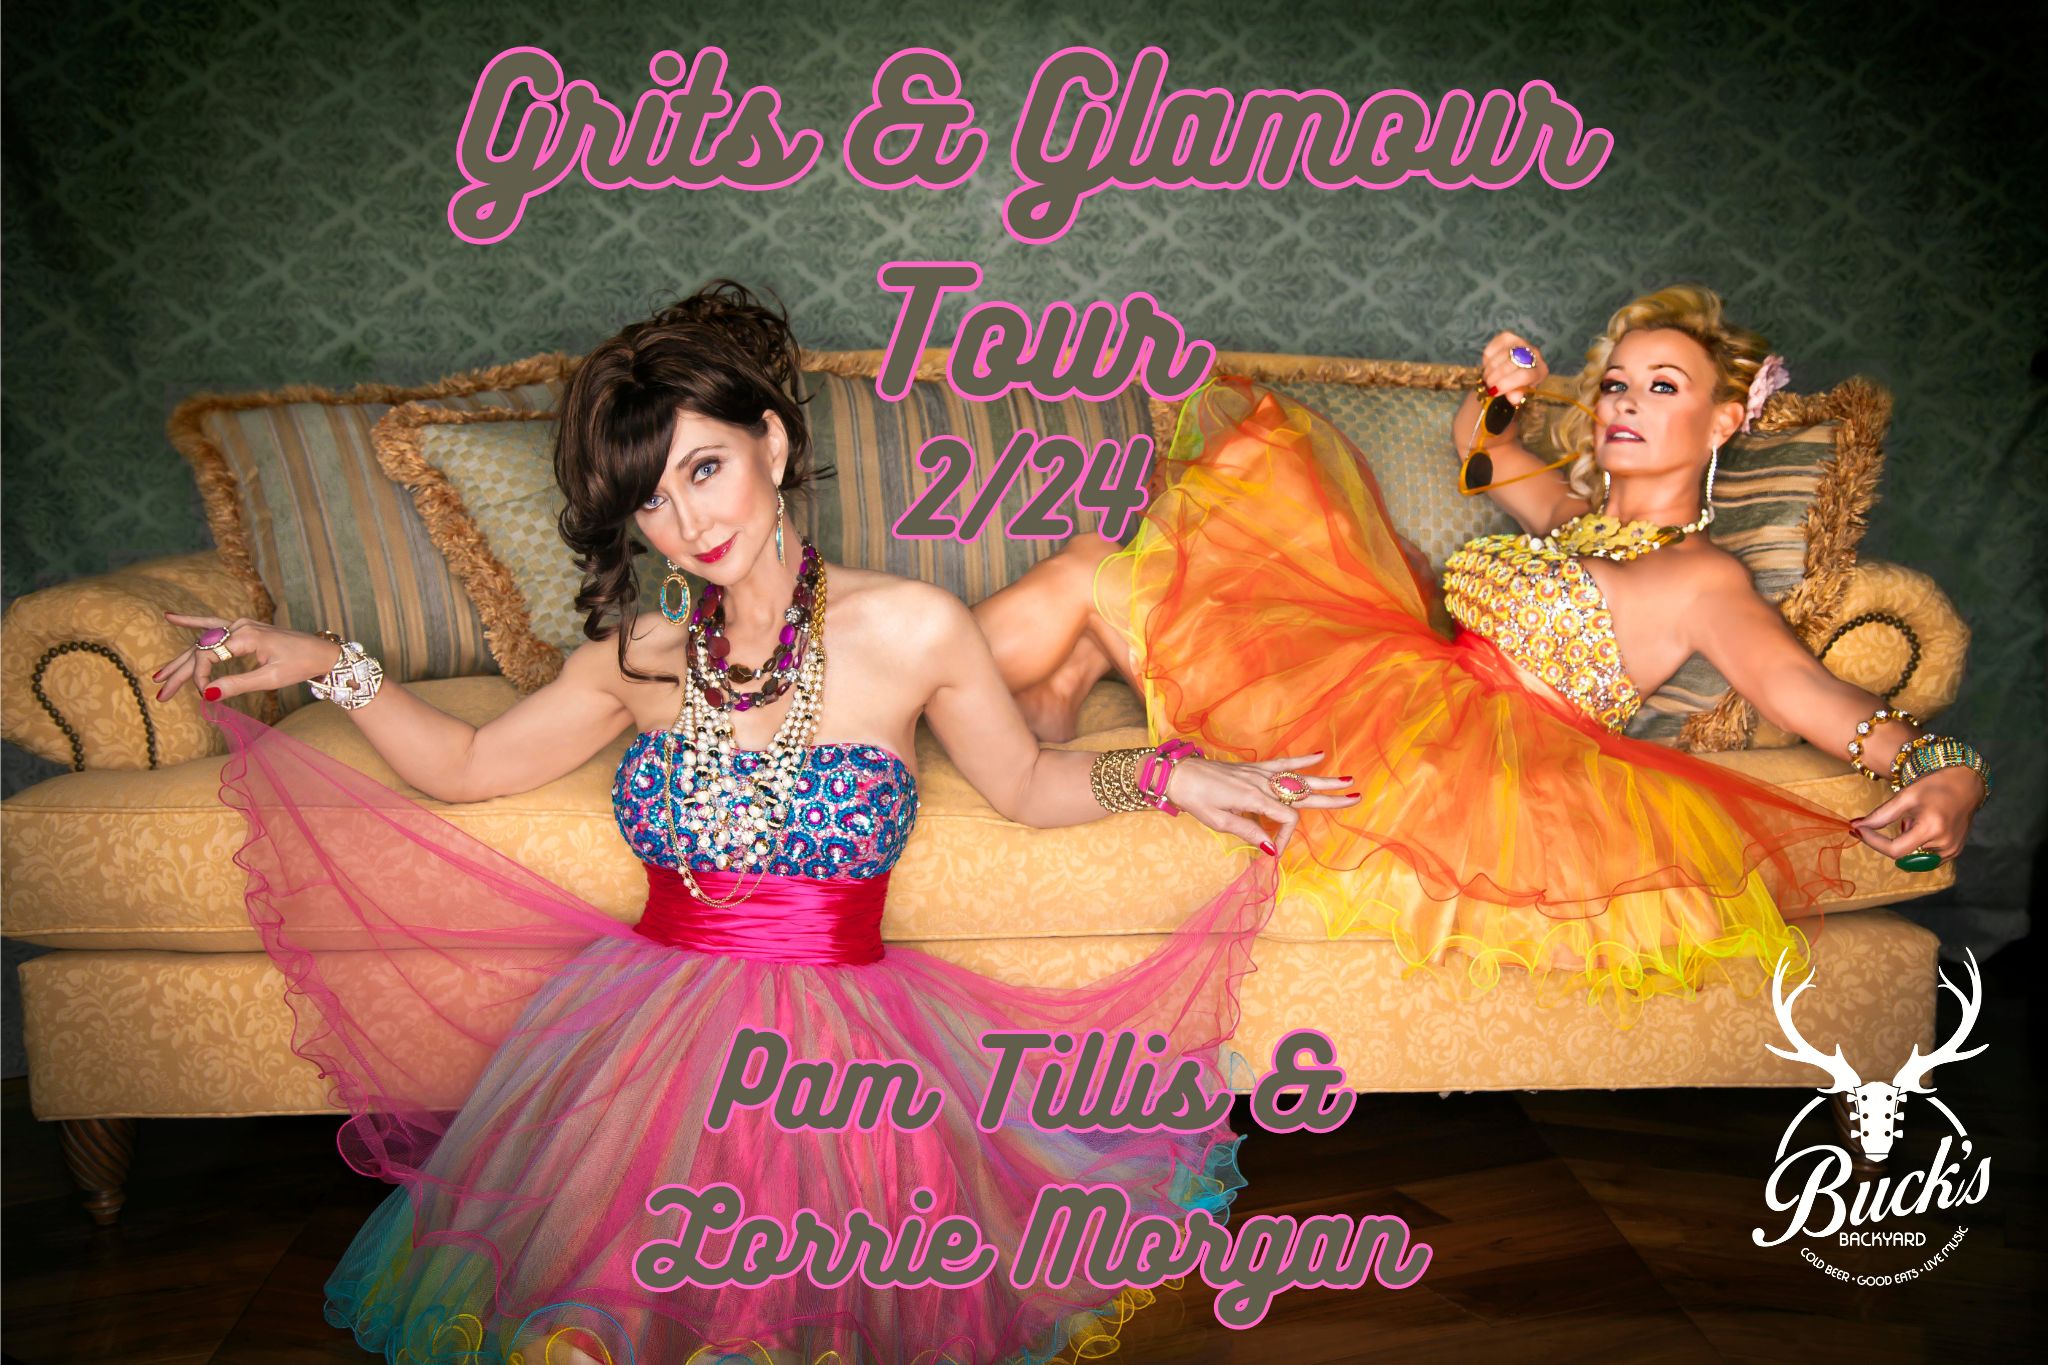 Grits and Glamour Lorrie Tillis and Lorrie Morgan - Buck's Backyard